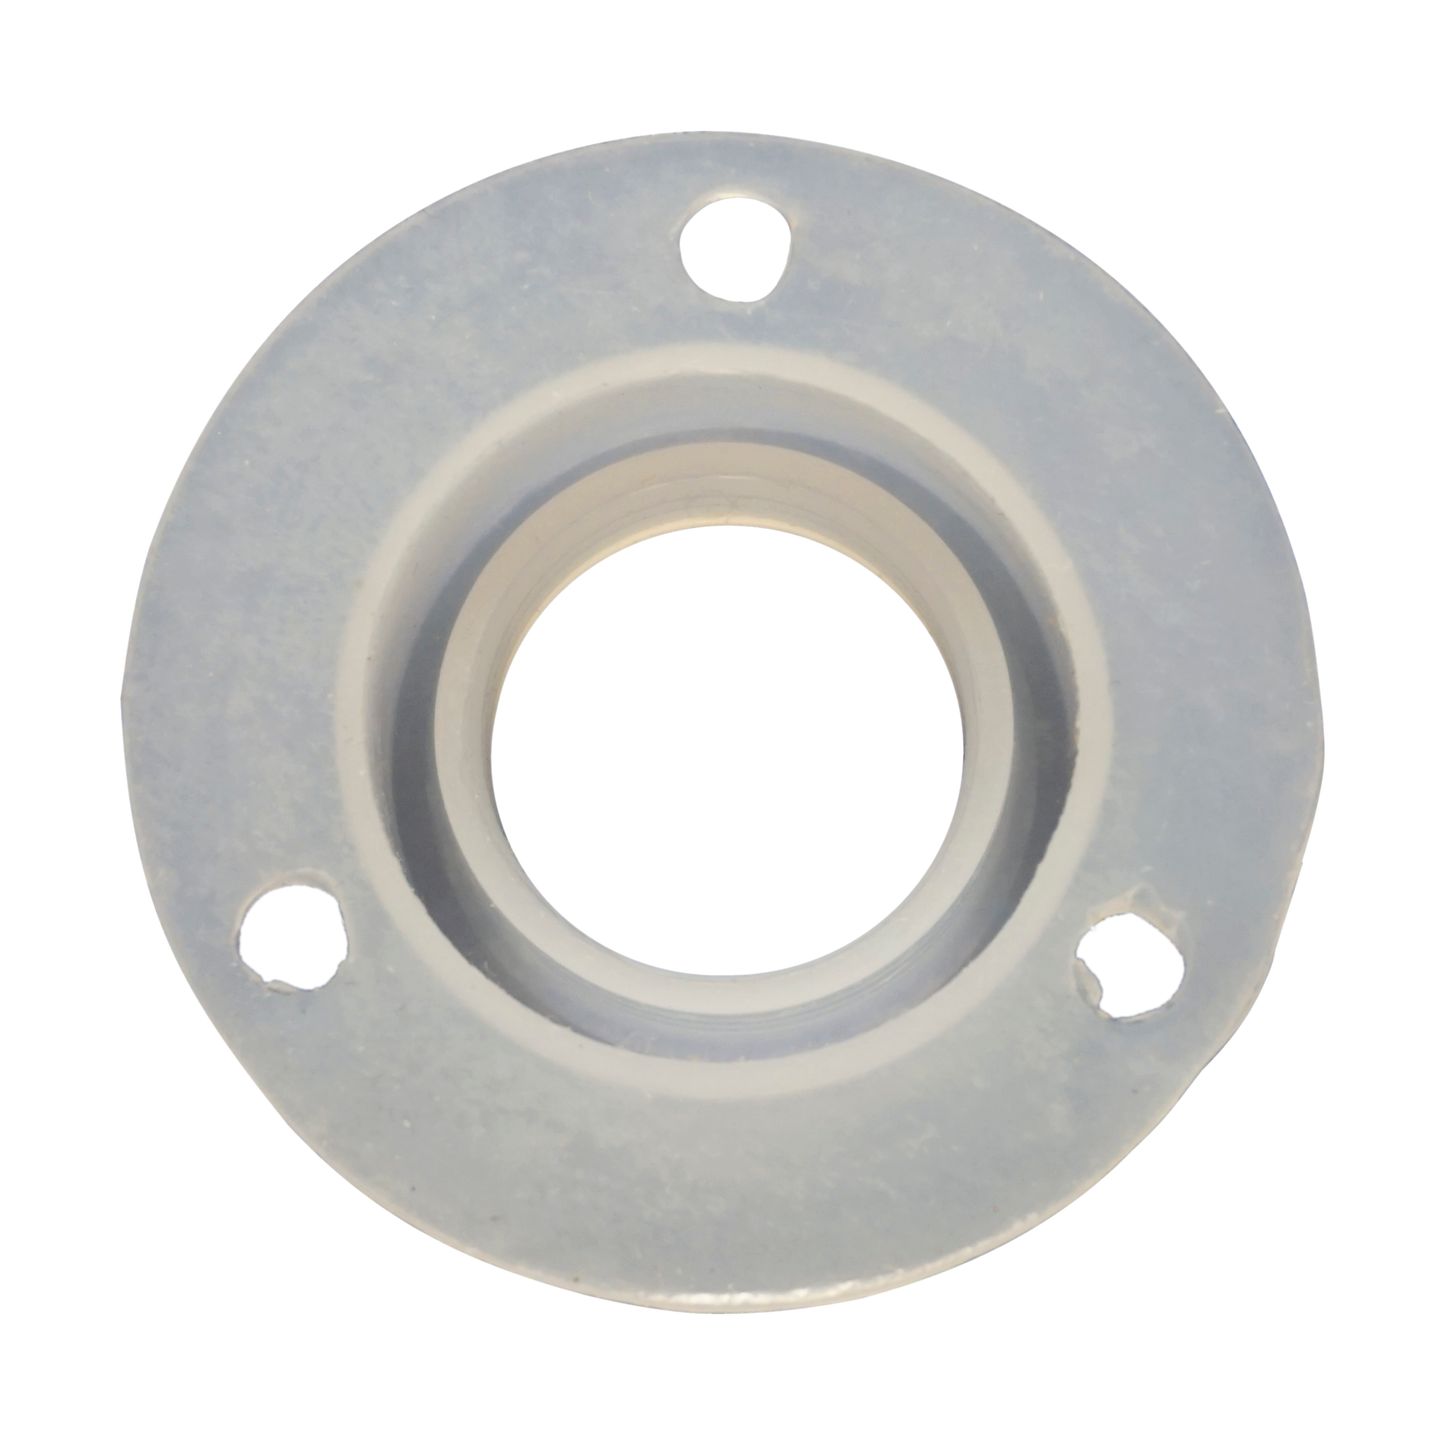 Replacement Bowl Gasket for our Elite 50 KT Ozone Fruit and Vegetable Washer